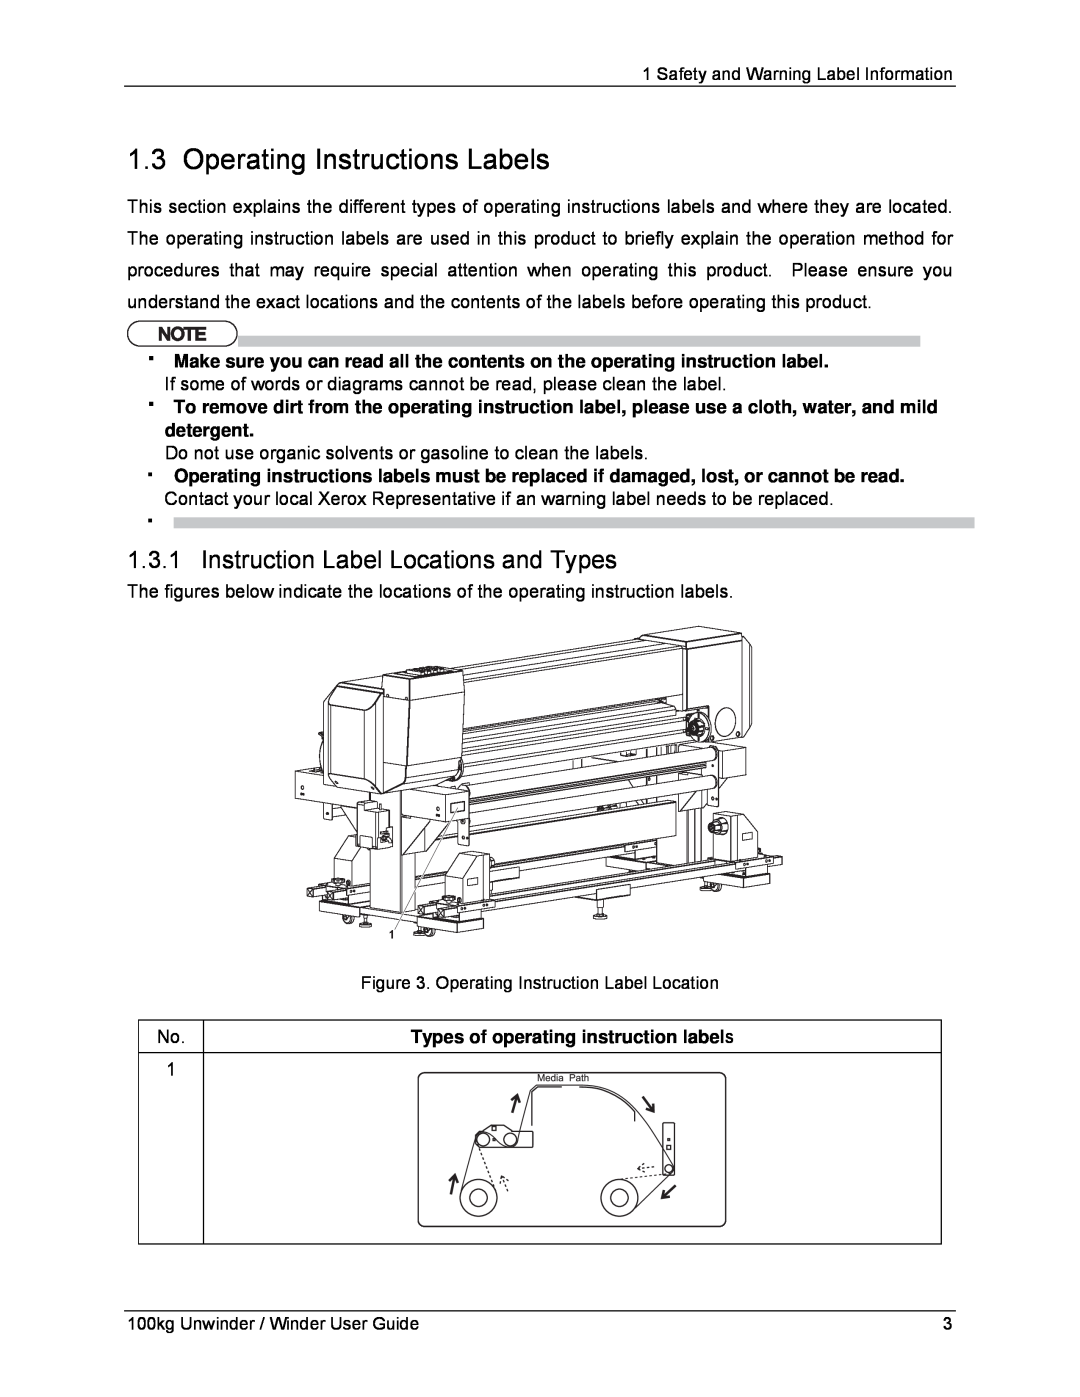 Xerox 8254E, 8264E manual Operating Instructions Labels, Instruction Label Locations and Types 